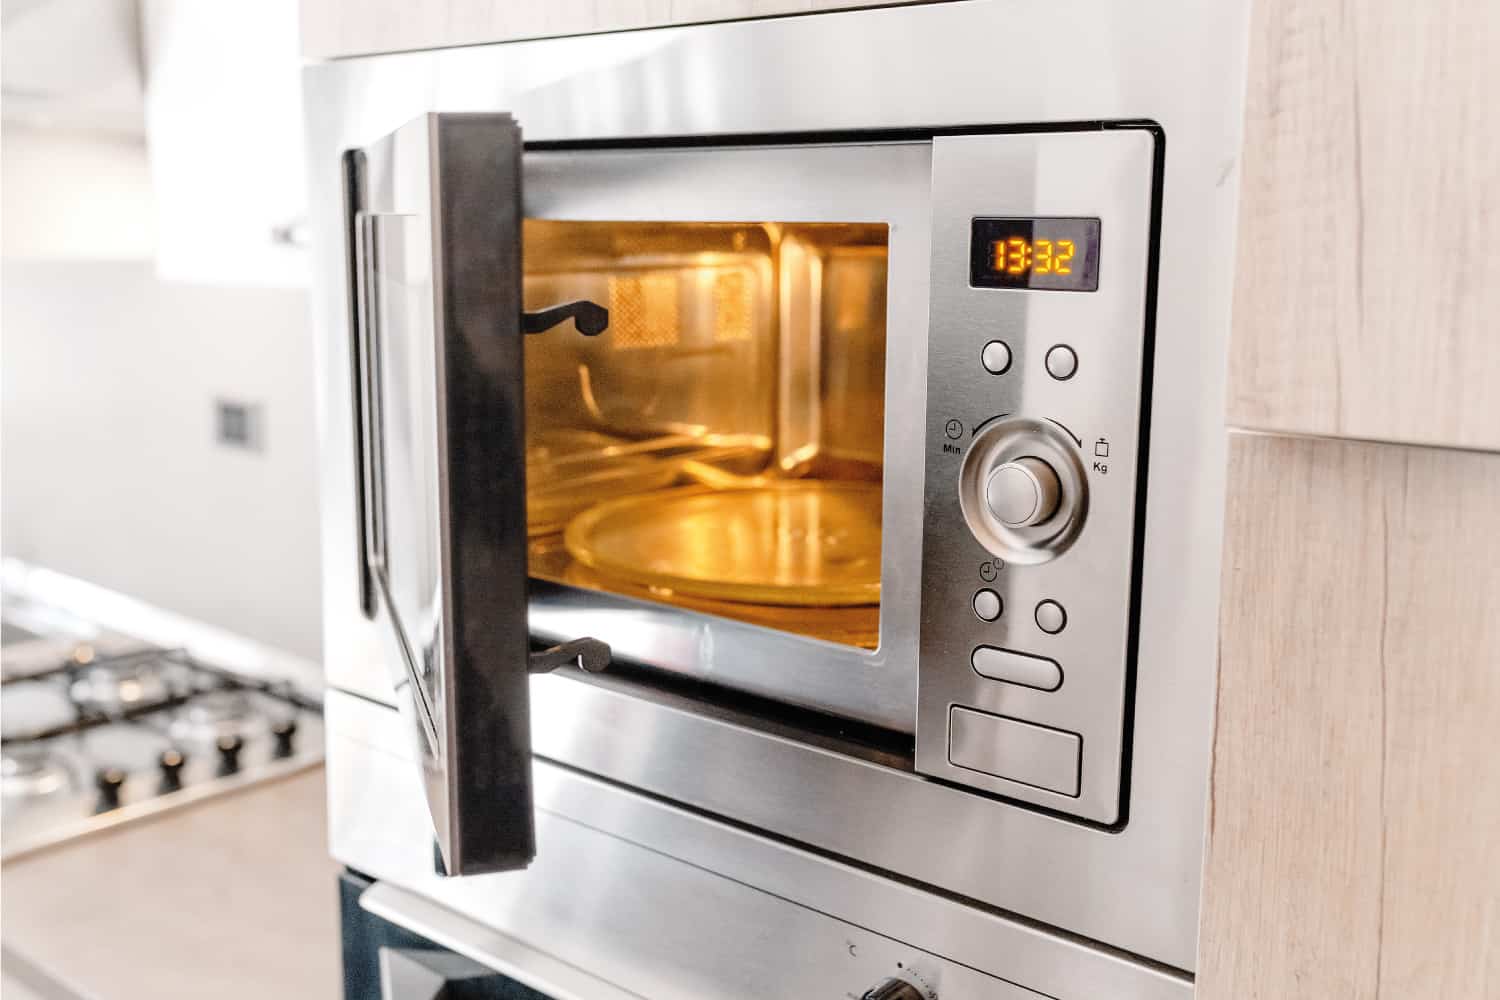 Modern kitchen microwave oven with its door open